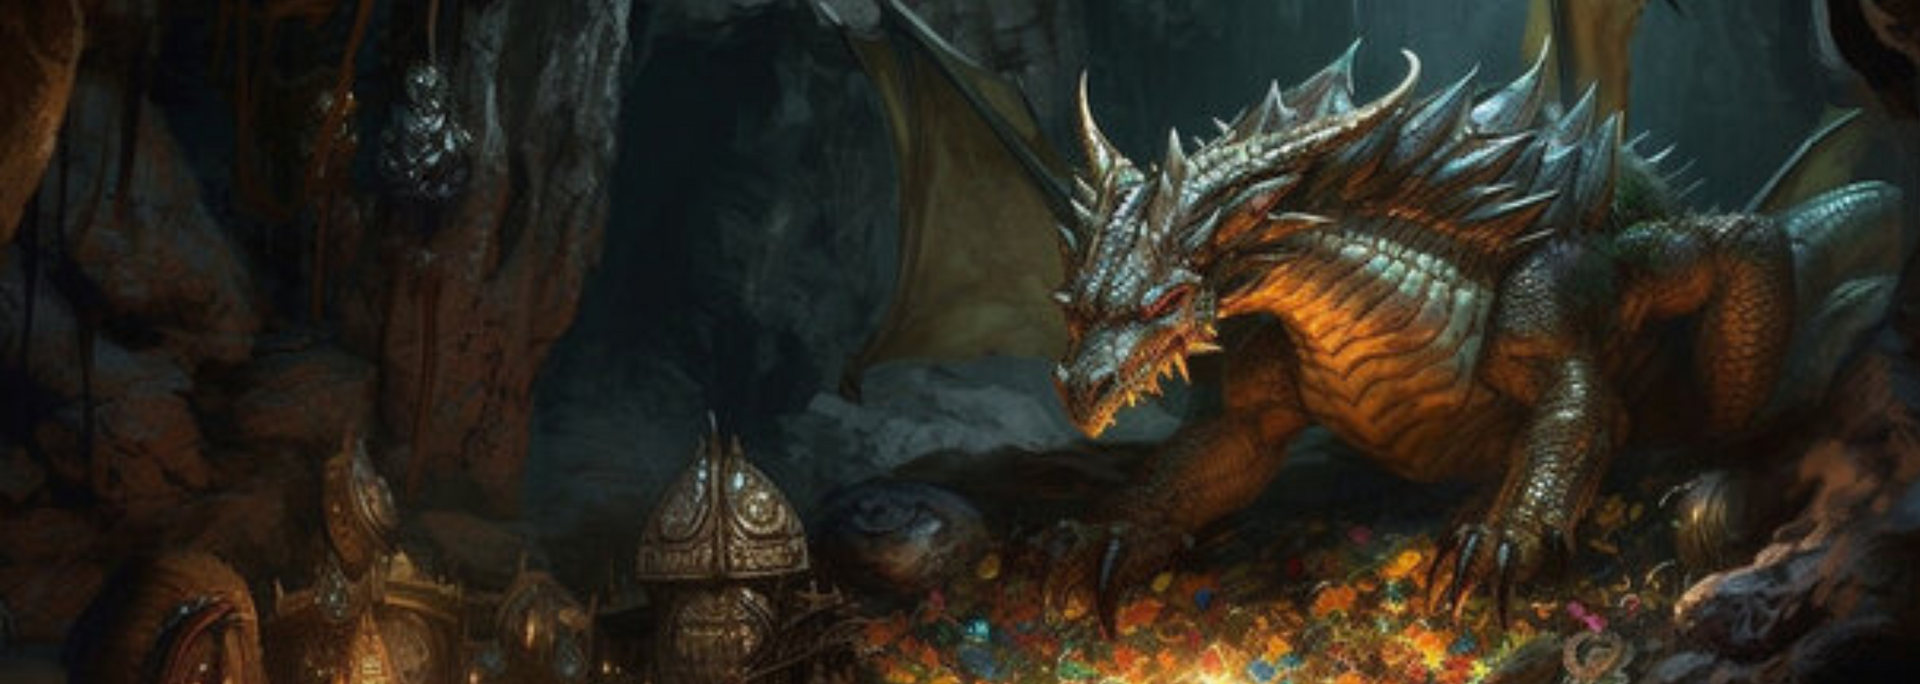 Picture of a dragon sitting on treasure